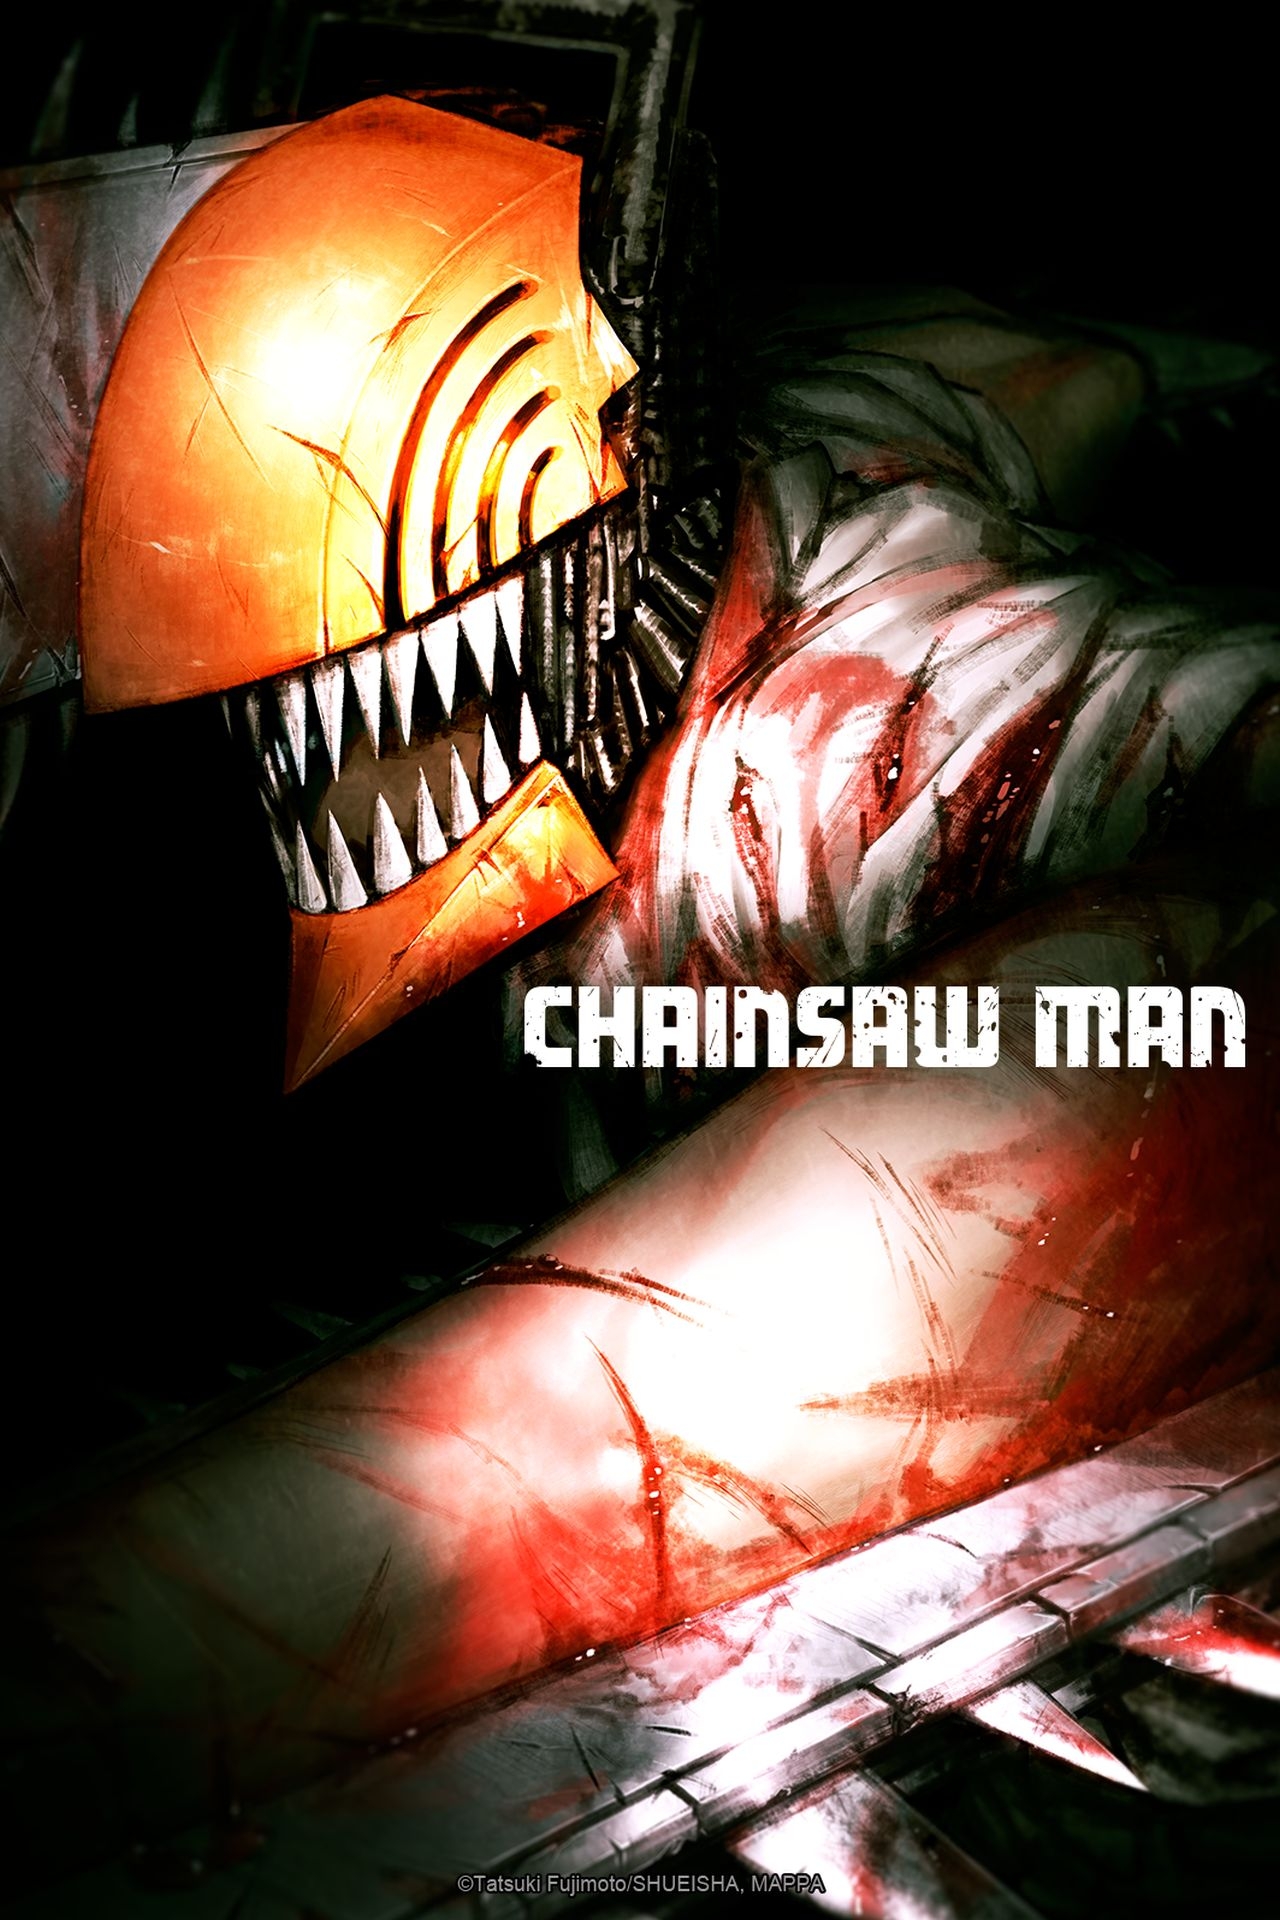 Chainsaw Man Announces Anime Order with an Epic Poster